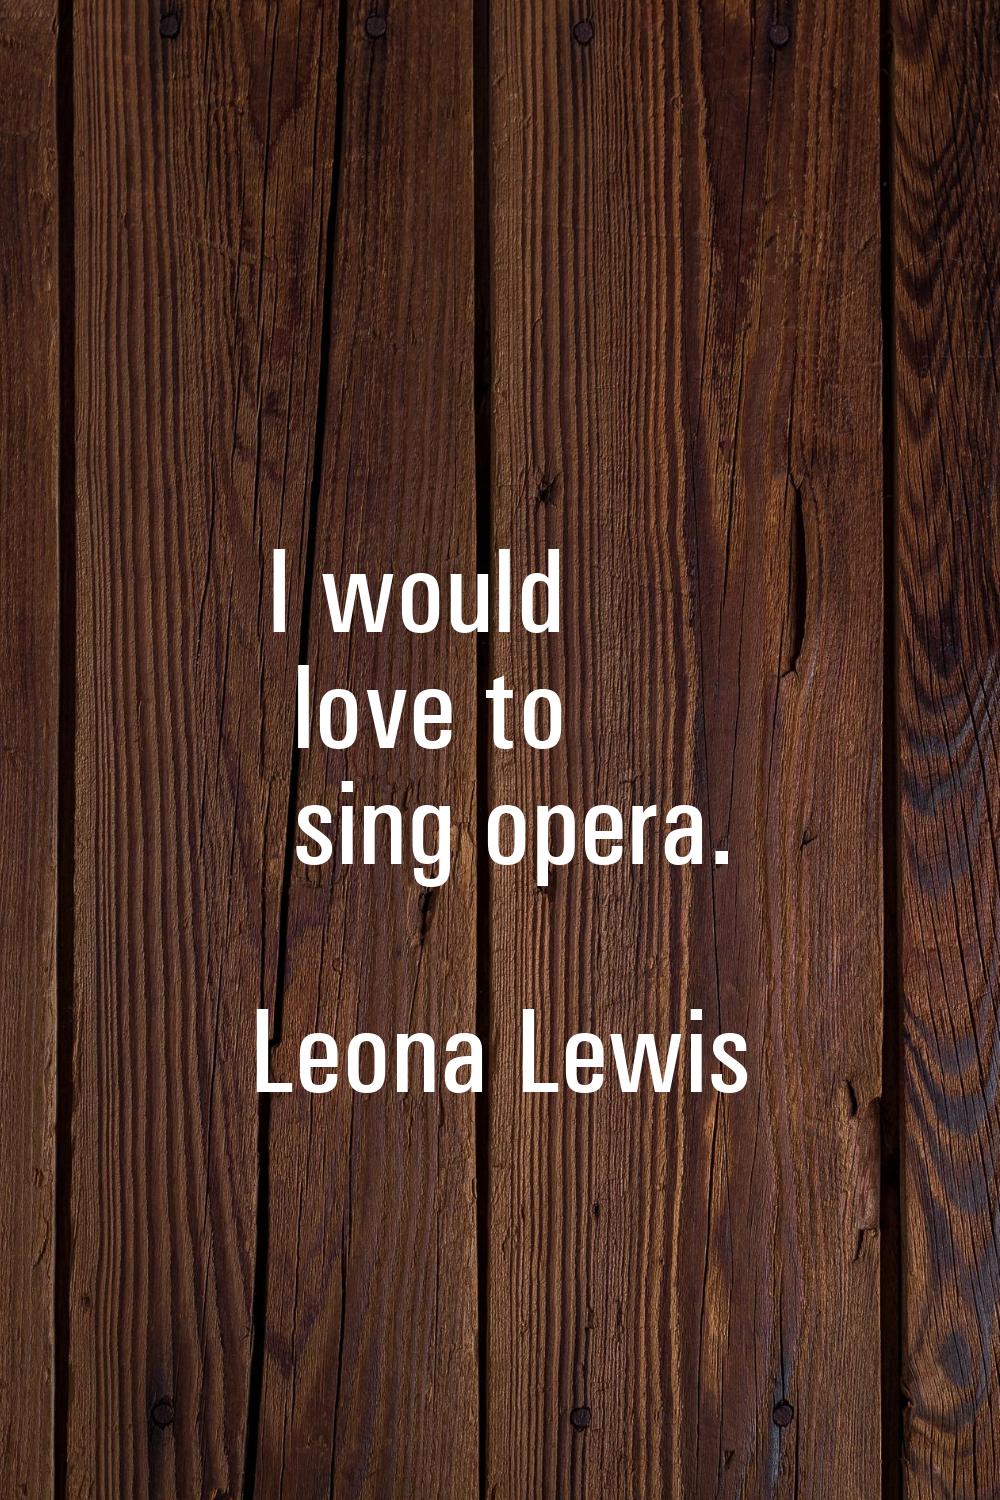 I would love to sing opera.